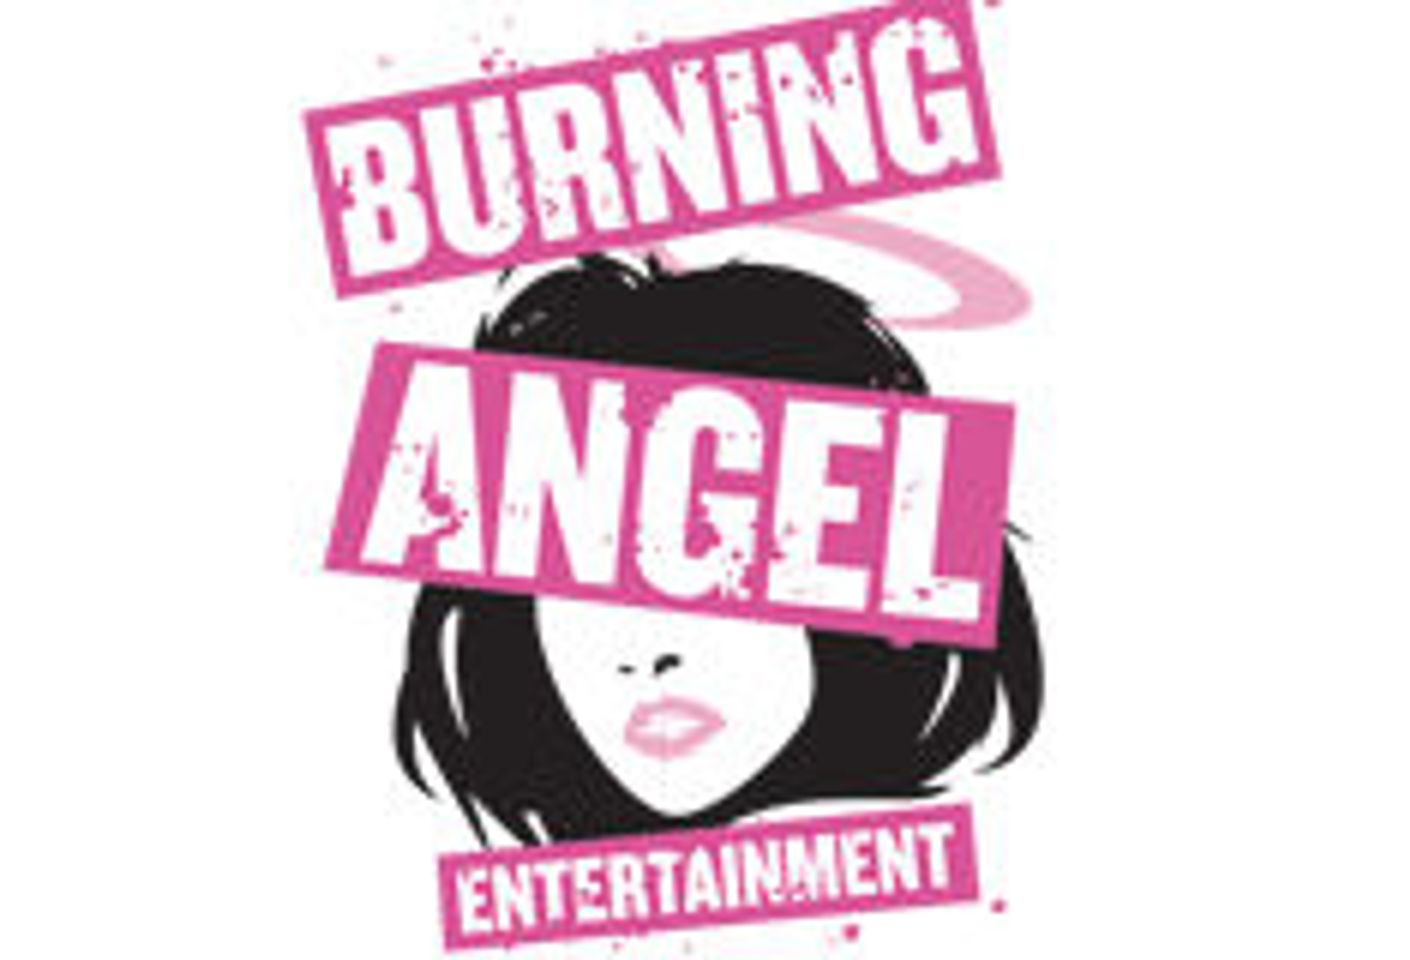 Check Out Sierra on This Week’s BurningAngel Webcam Shows